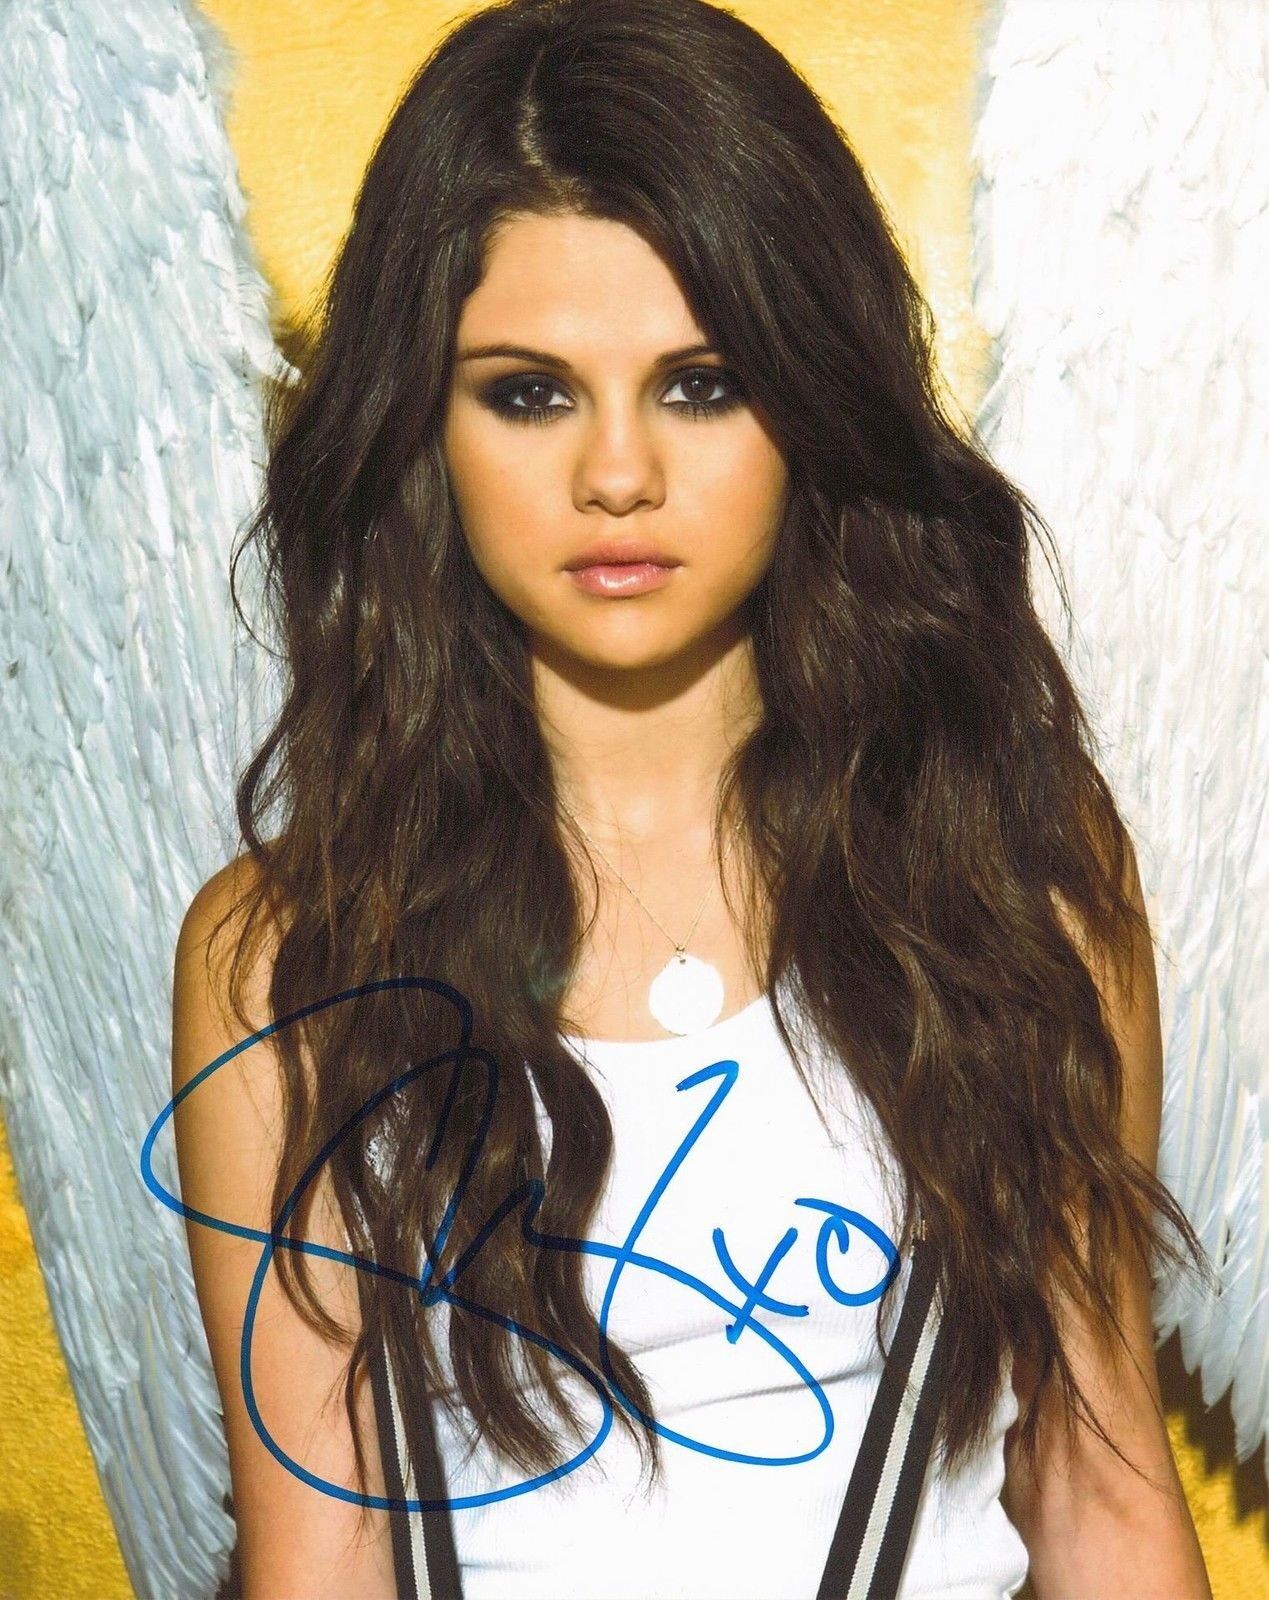 SELENA GOMEZ AUTOGRAPH SIGNED PP Photo Poster painting POSTER